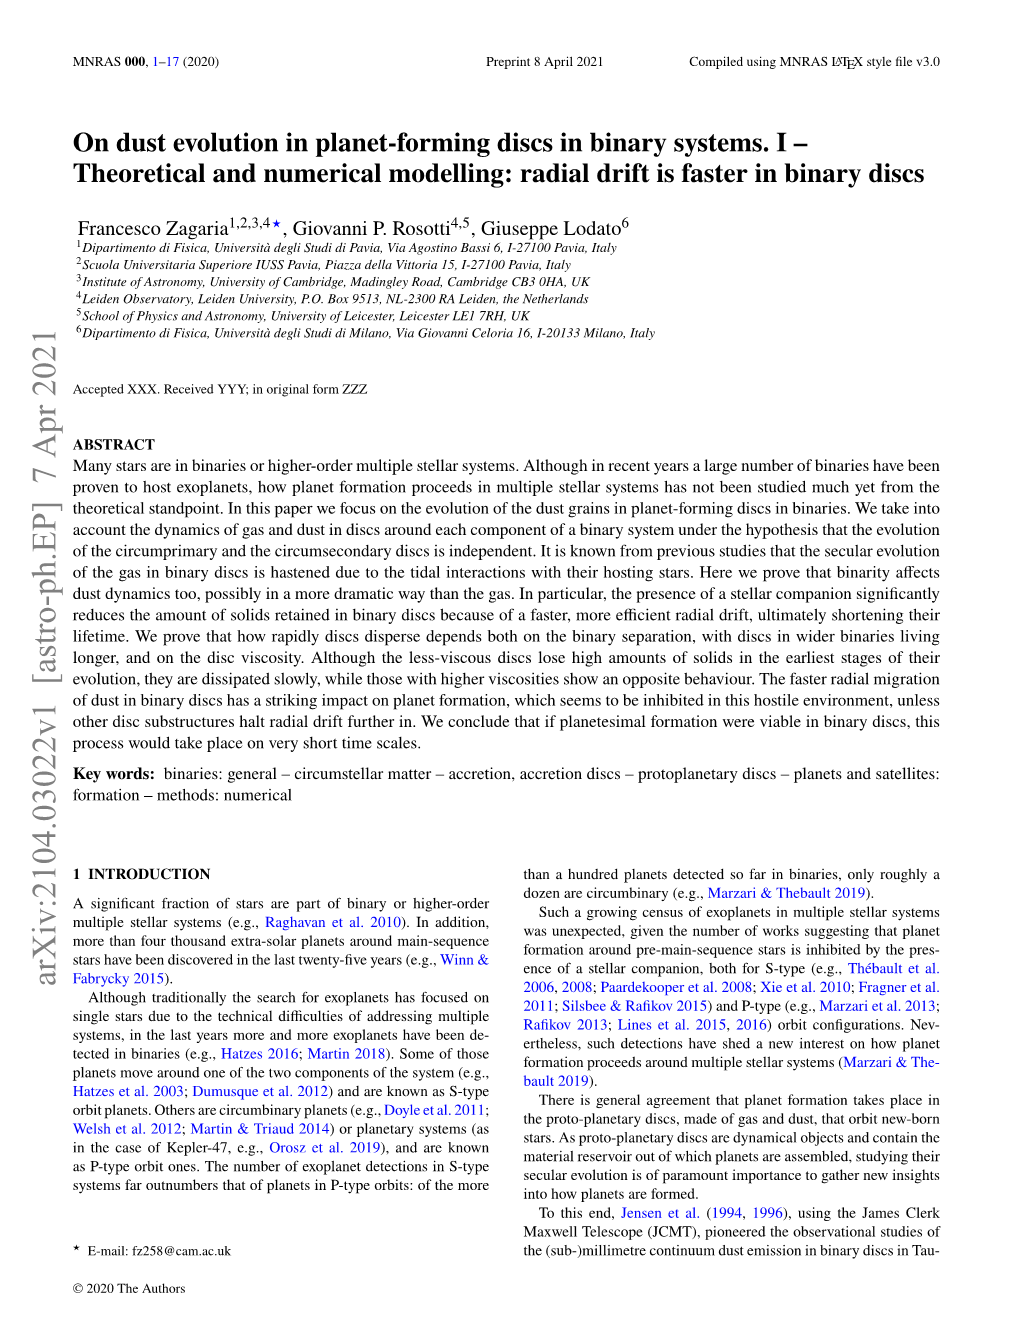 Theoretical and Numerical Modelling: Radial Drift Is Faster in Binary Discs